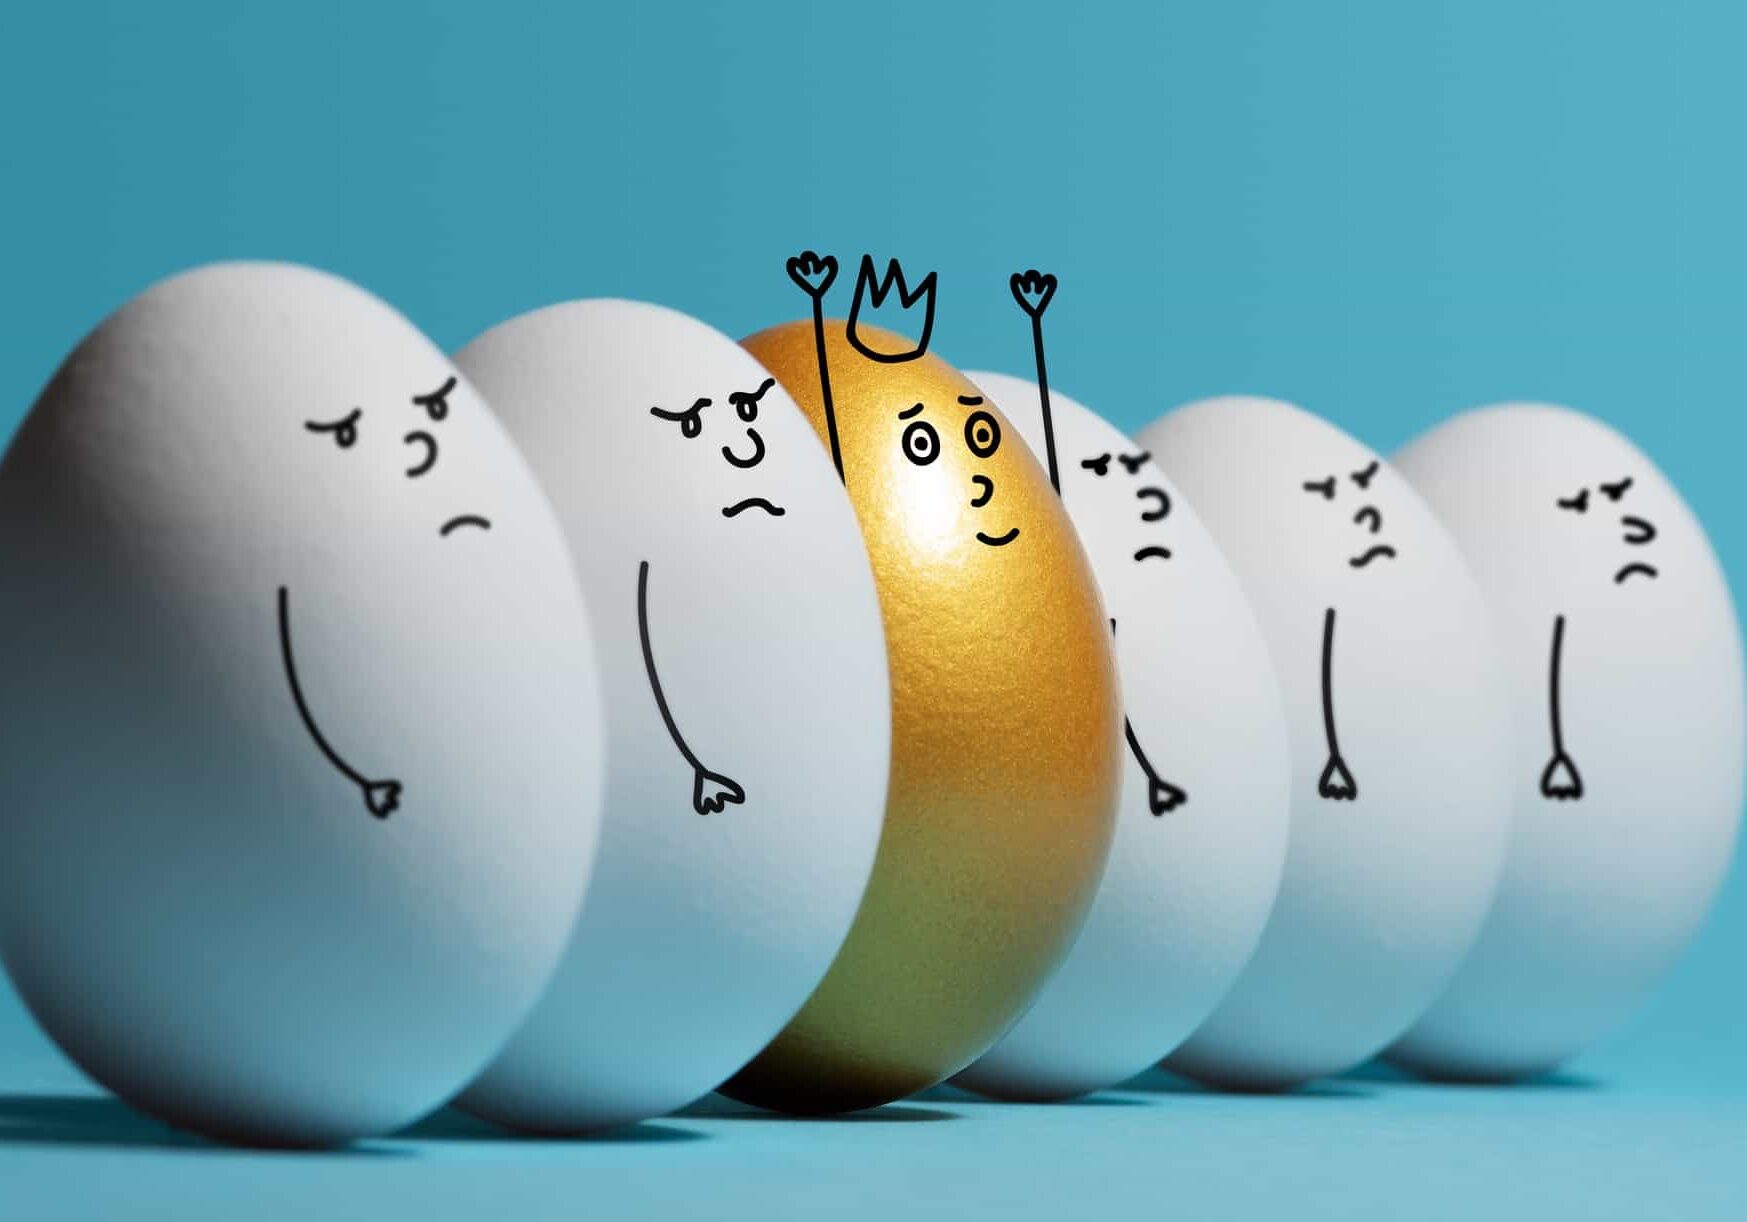 outperforming asx share price represented by row of white eggs with cartoon sad faces with one gold egg with happy face and crown